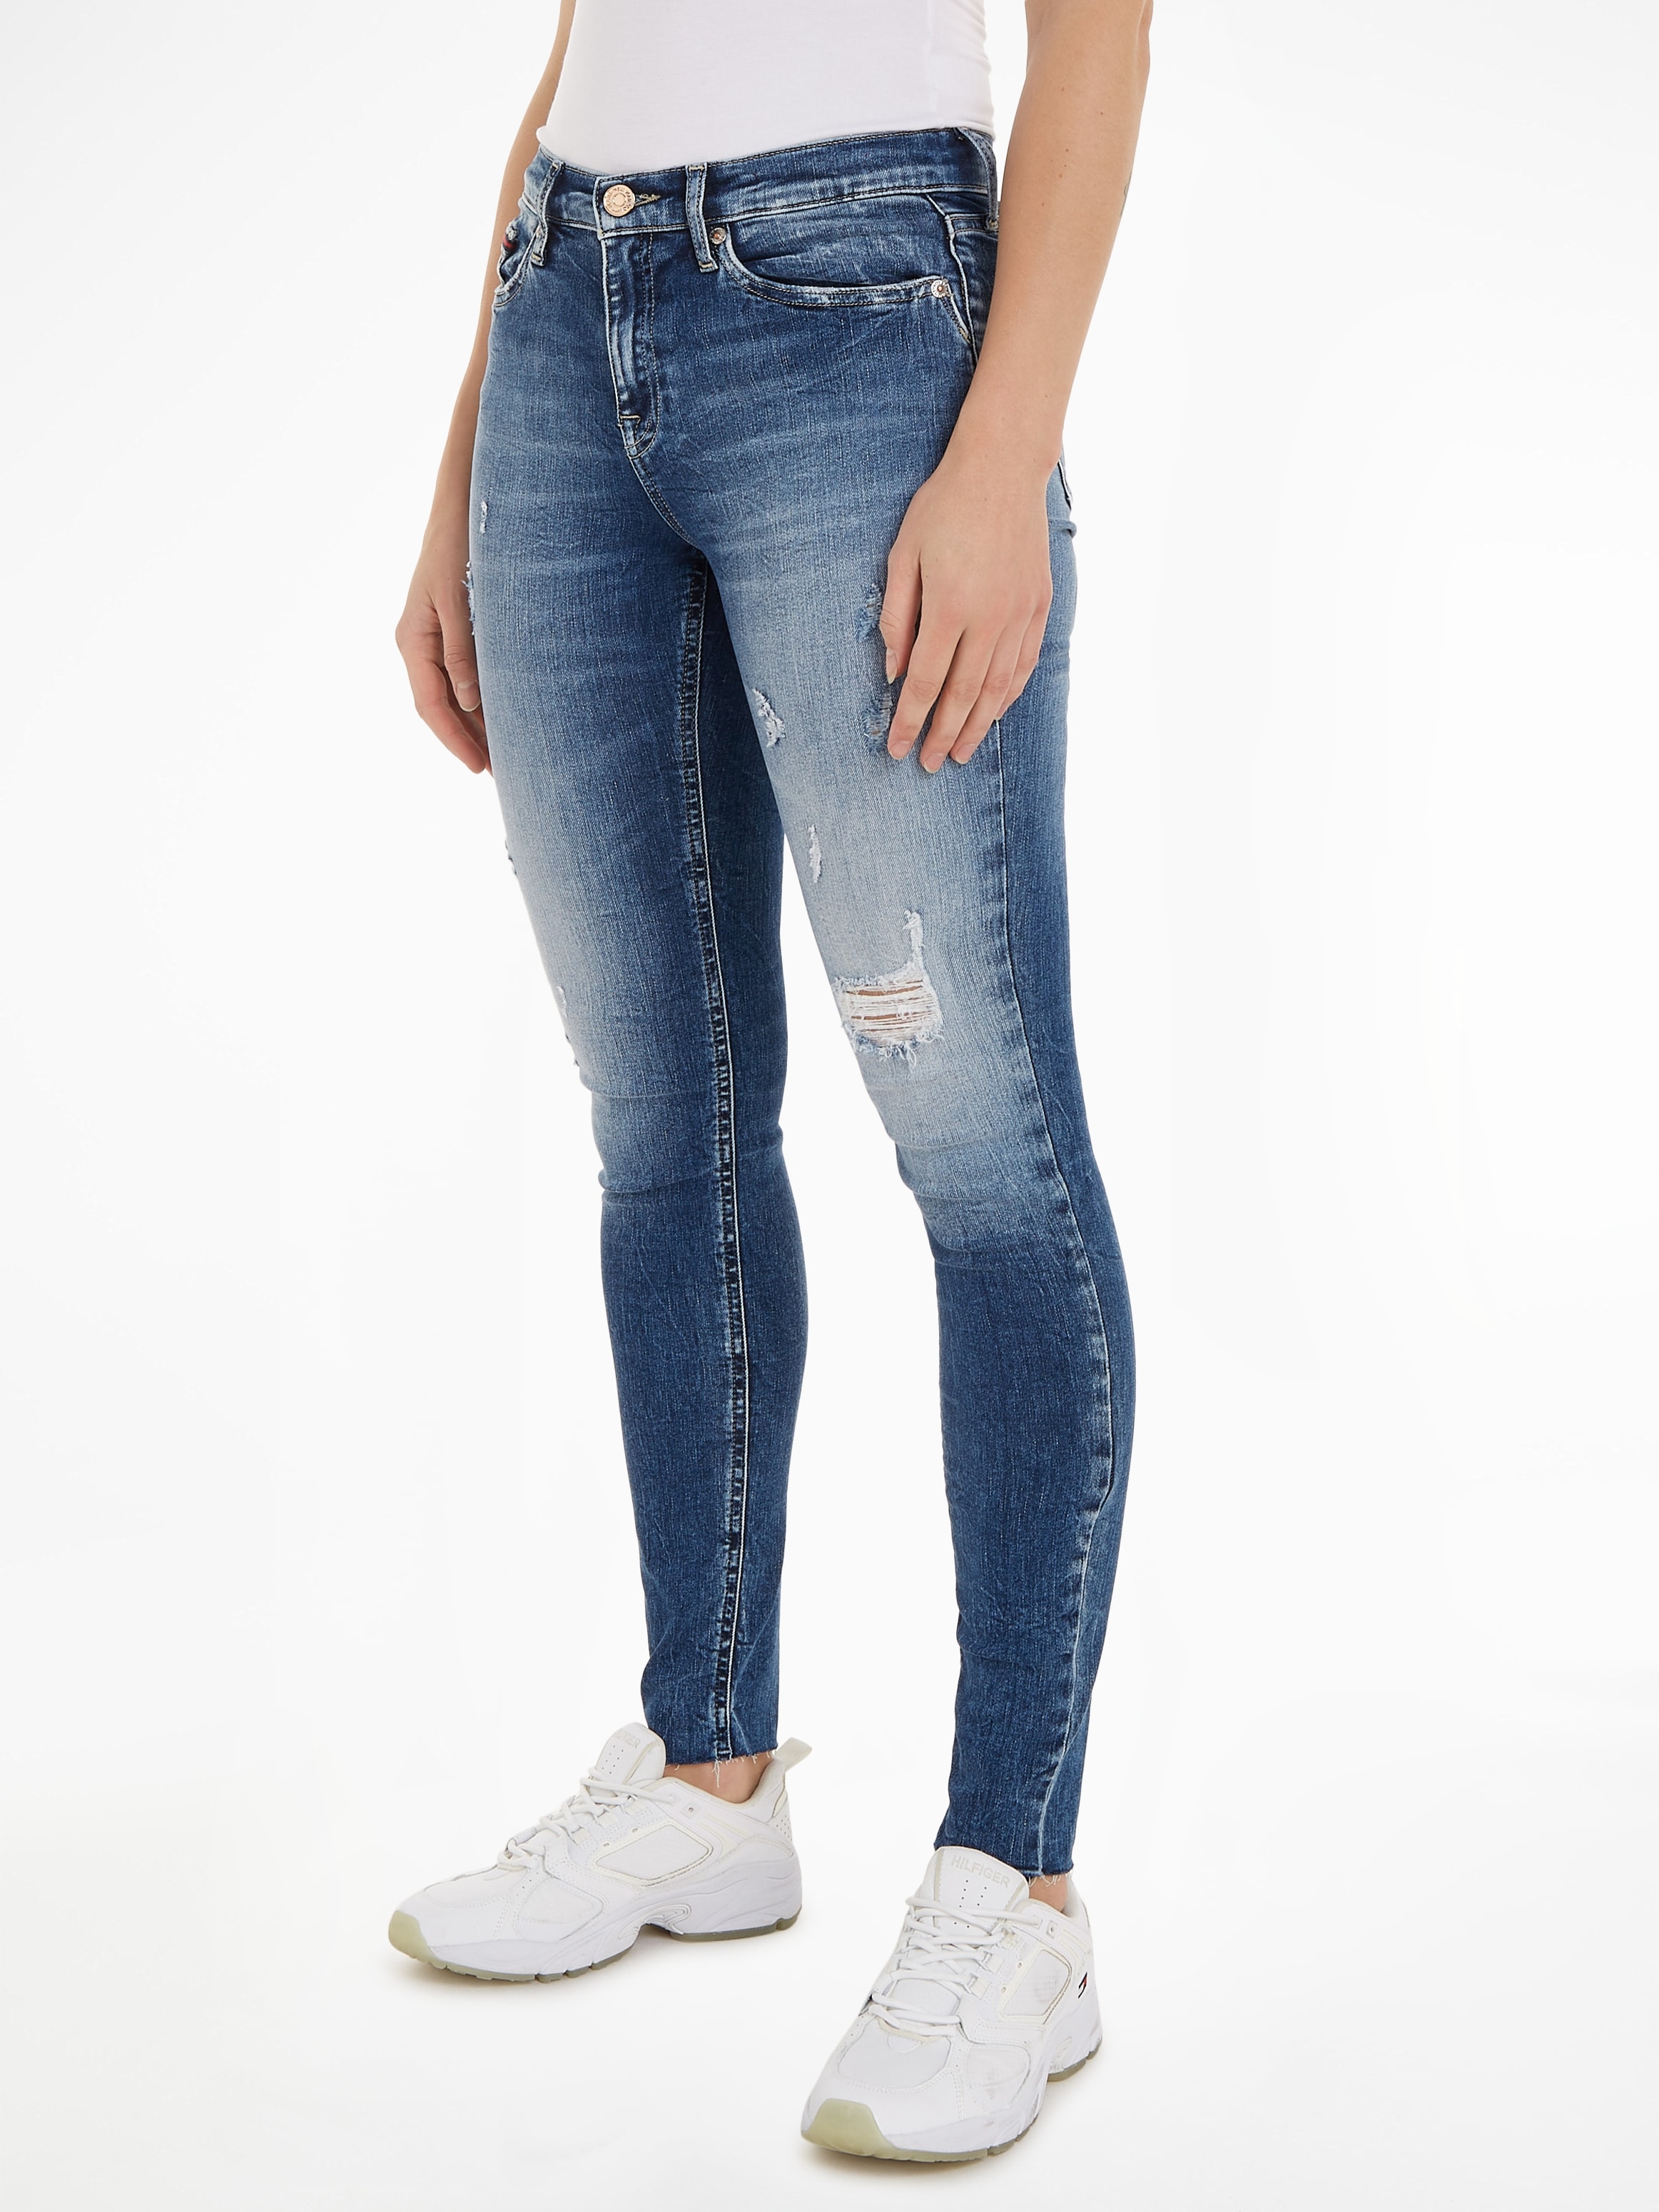 MR Tomma »NORA SKN CG2235«, mit bei Tommy OTTO Jeans Jeans Skinny-fit-Jeans Markenbadge